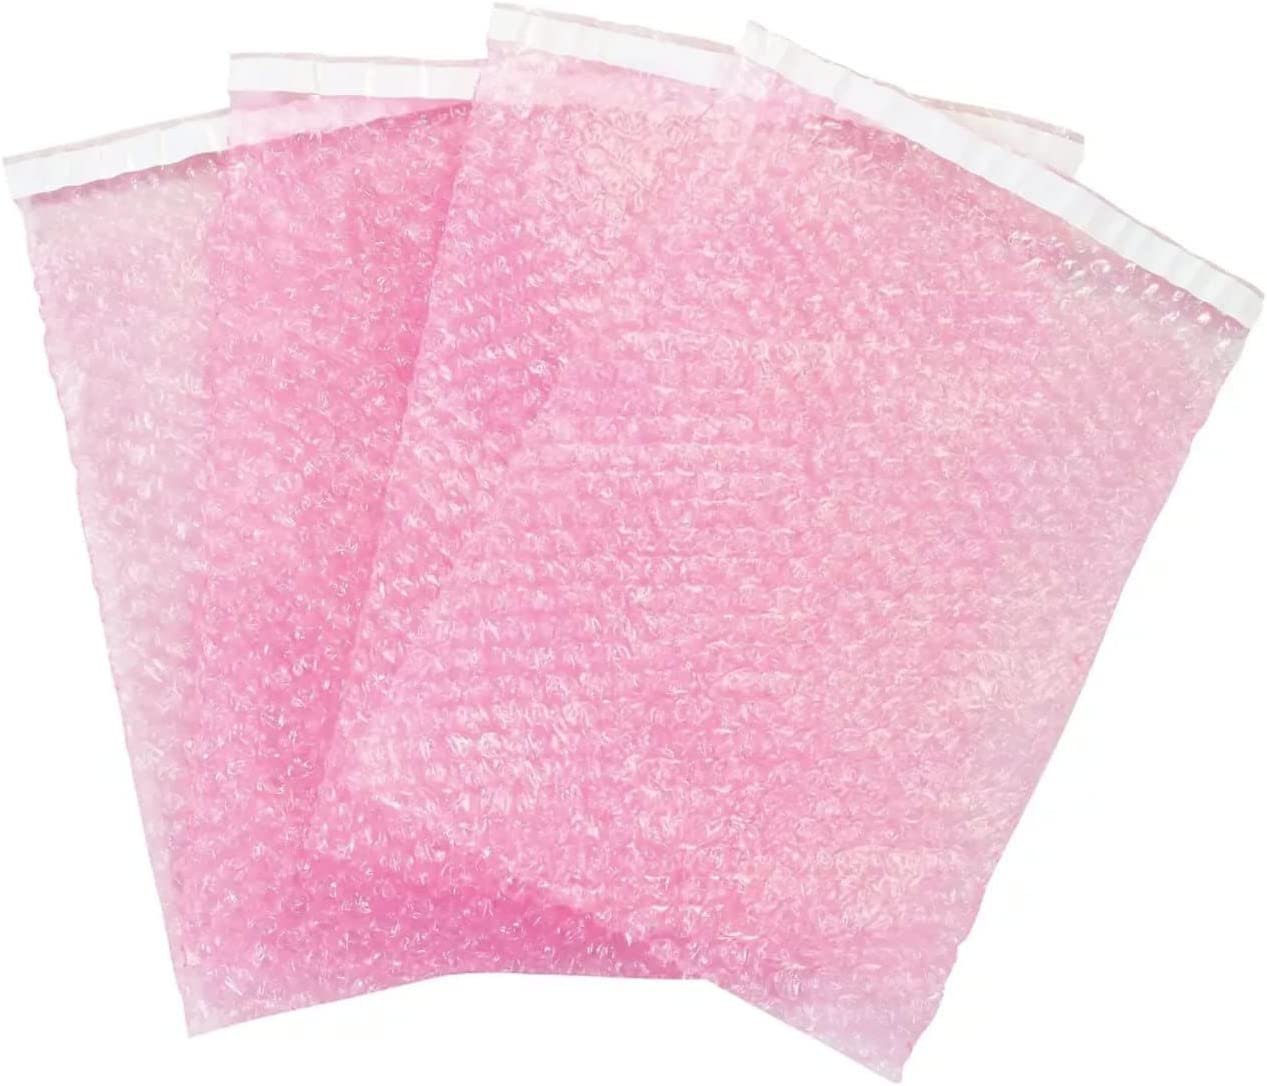 50 - 4x7.5 Anti-Static Bubble Out Pouches Bags Wrap Cushioning Self Seal